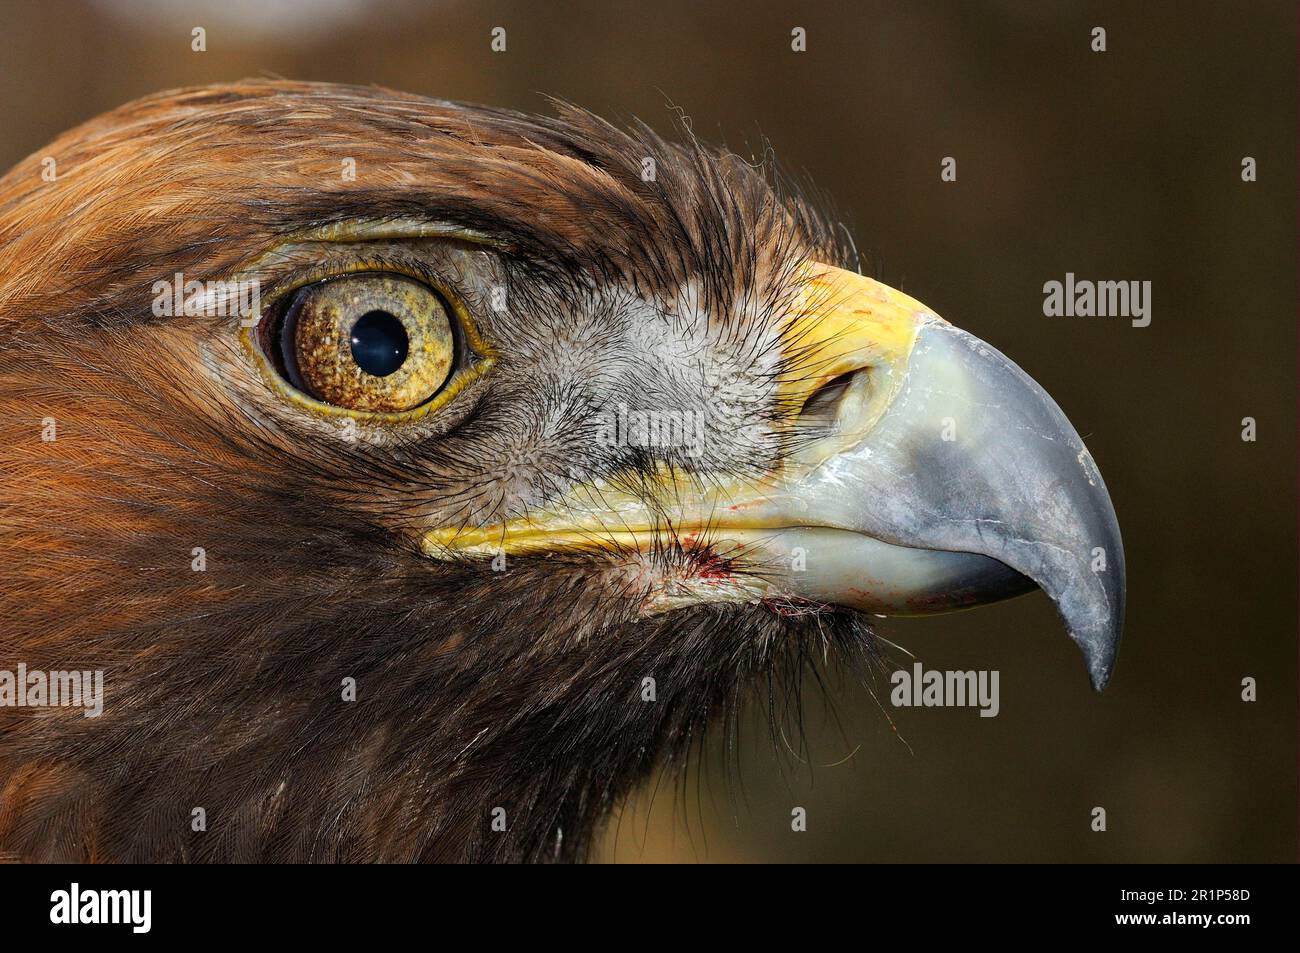 Closeup Head Of A Golden Eagle Isolated On Black Background Stock Photo -  Download Image Now - iStock